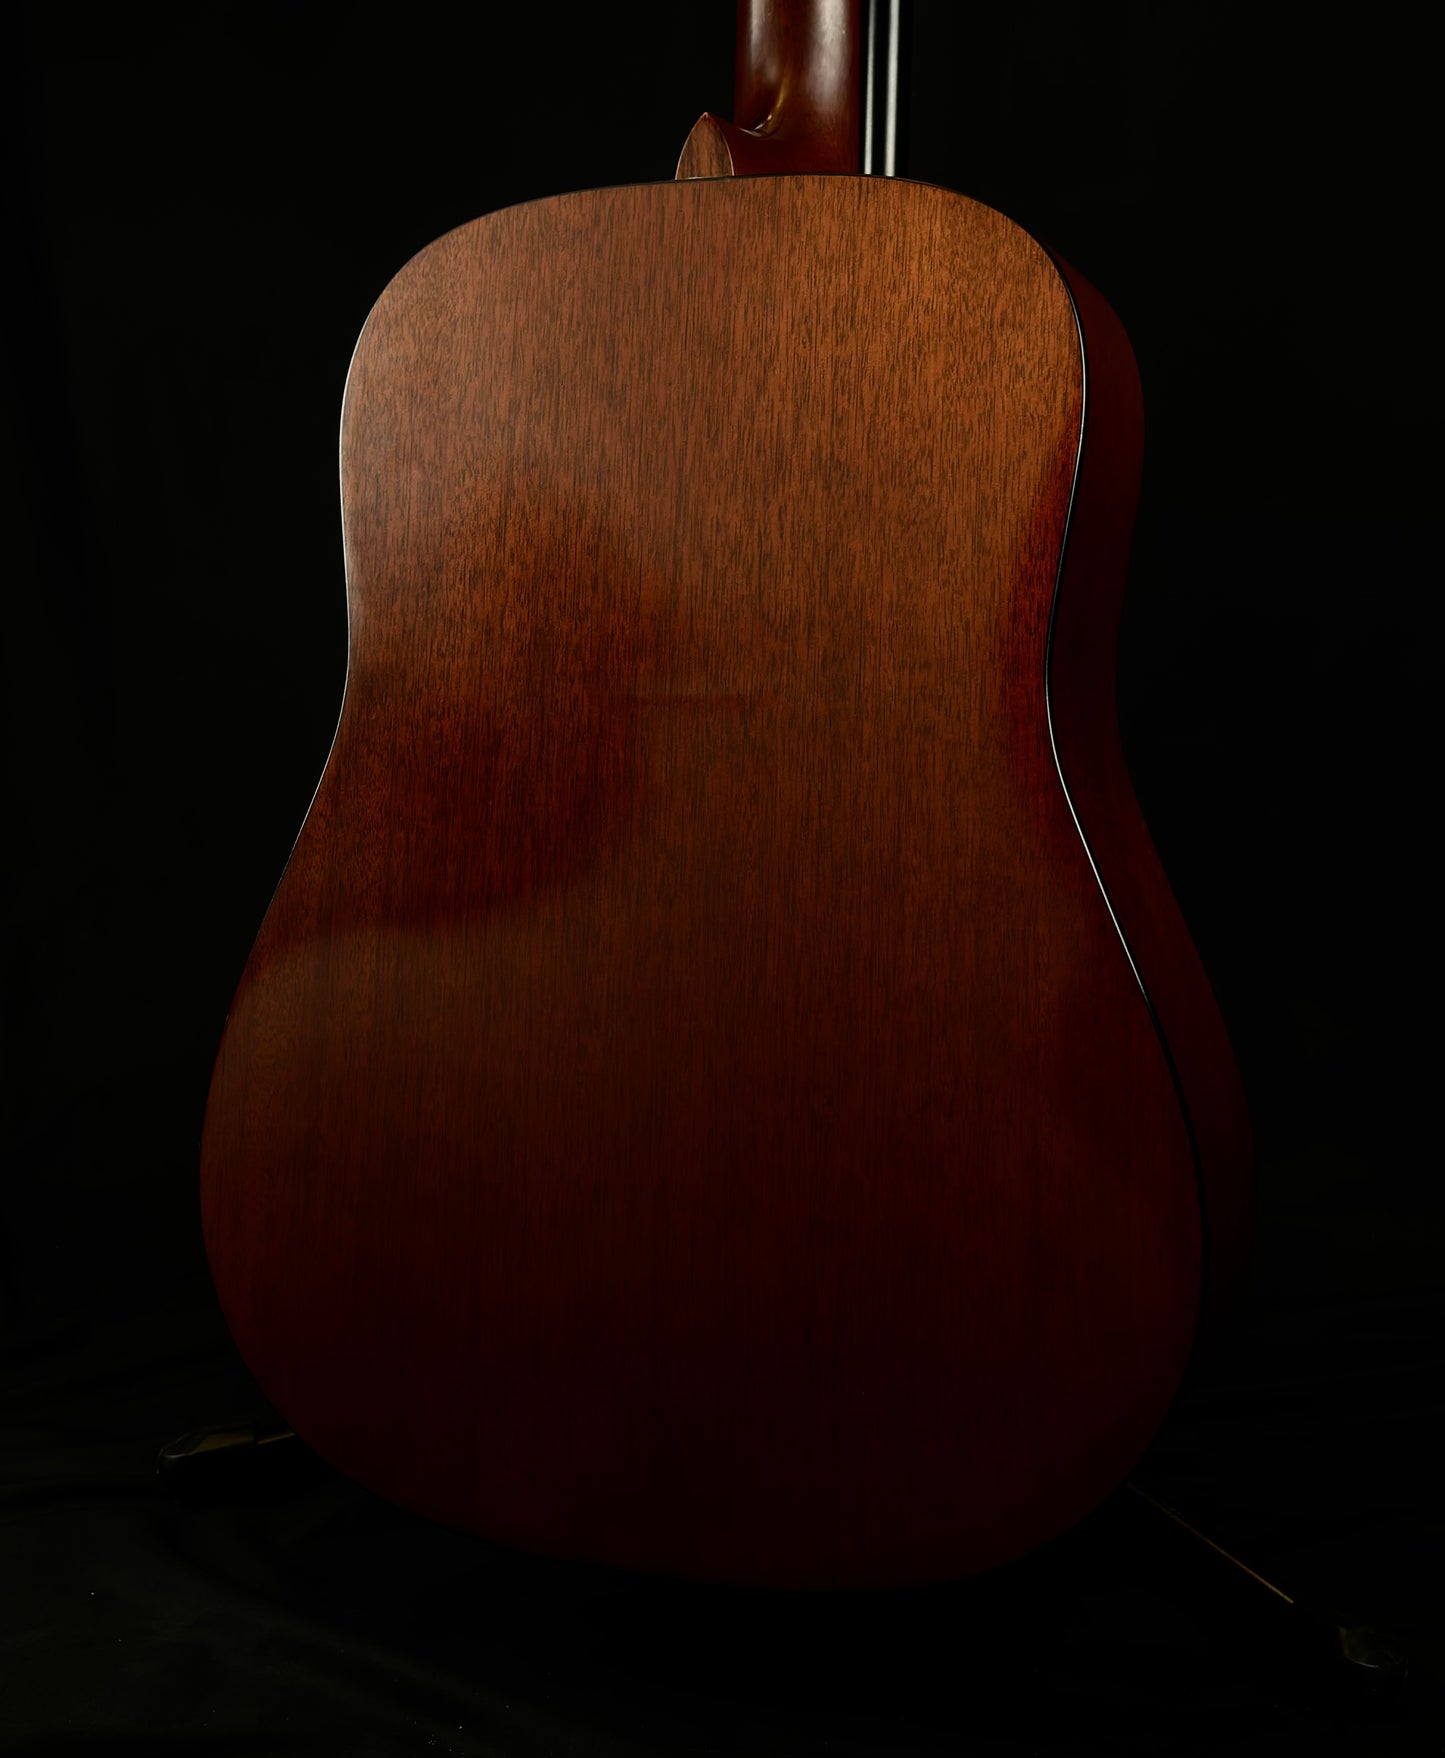 Martin DM Left Handed Mahogany Acoustic (Pre-Owned)